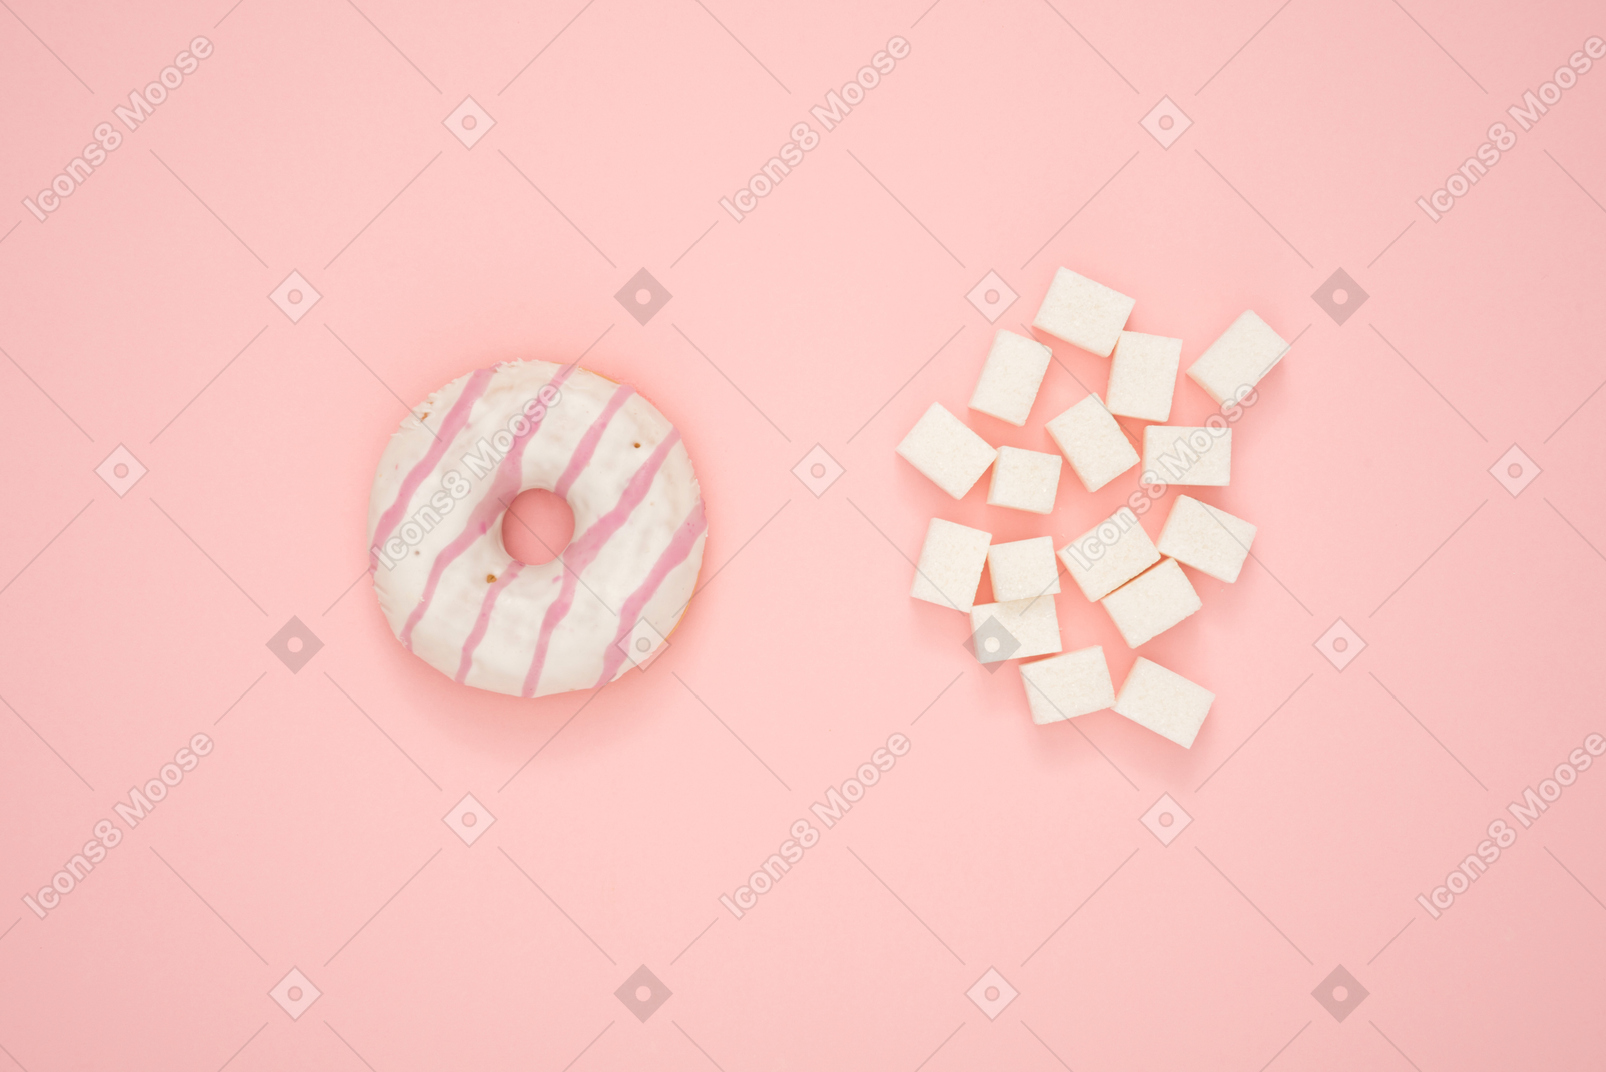 Donut and sugar cubes over pink background